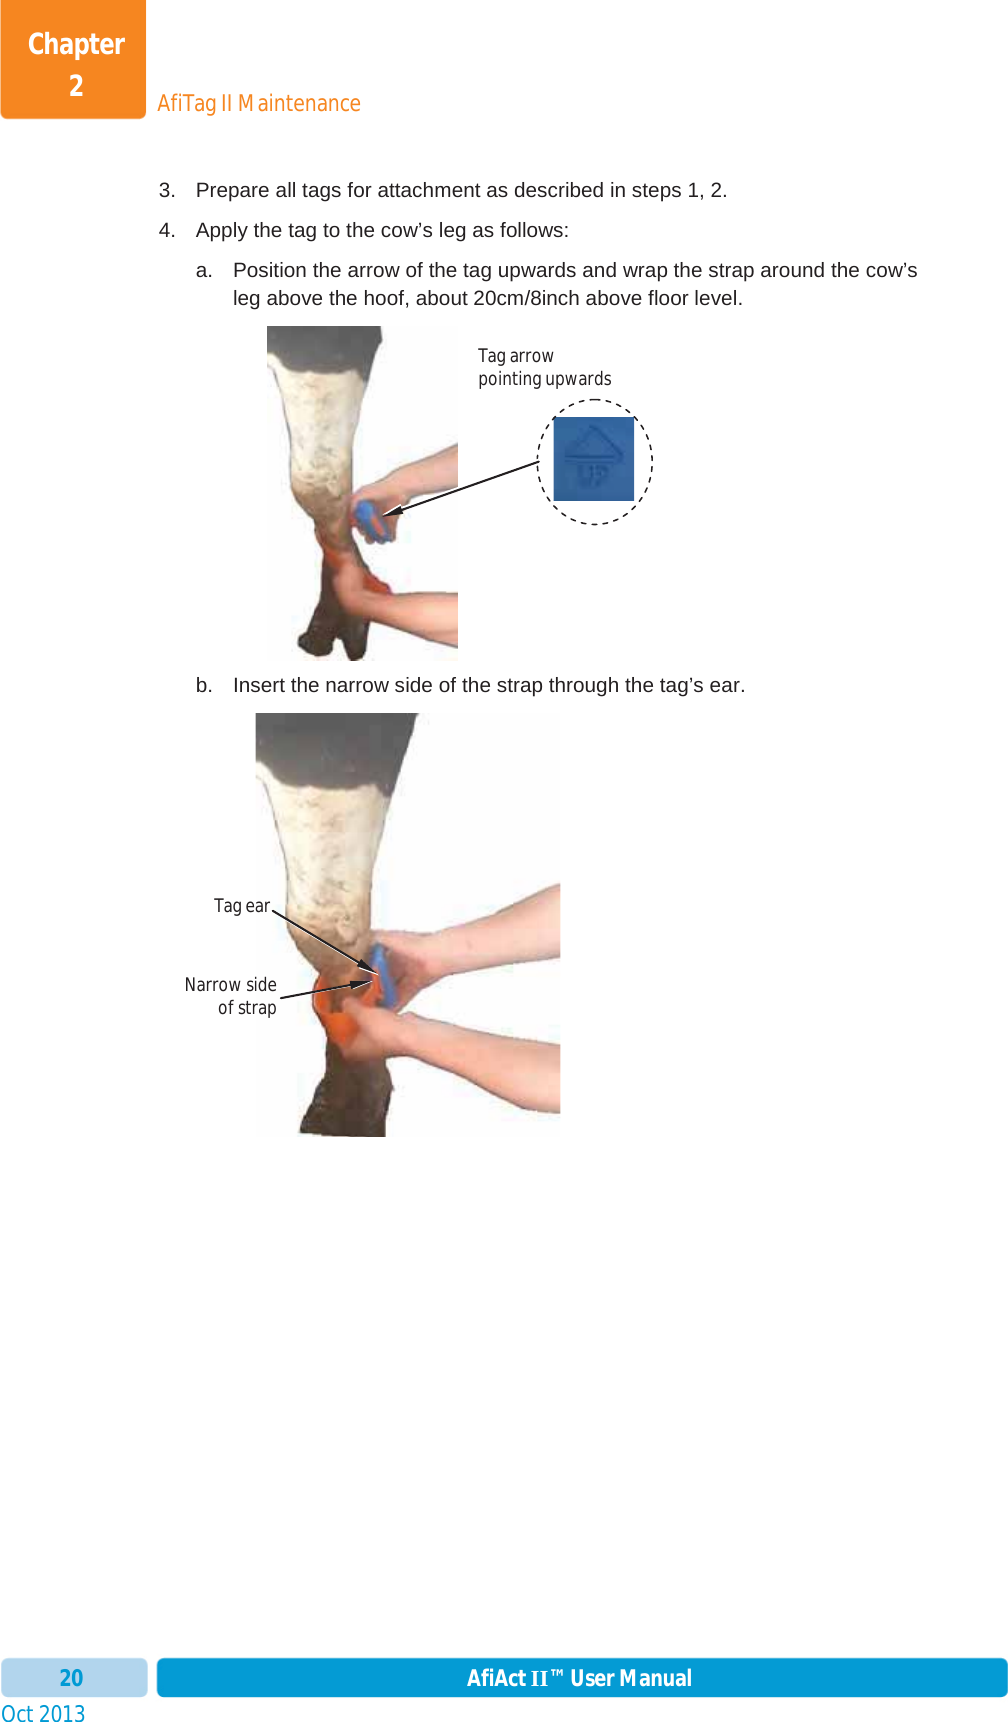 Oct 2013 AfiAct II™ User Manual20AfiTag II MaintenanceChapter 23.  Prepare all tags for attachment as described in steps 1, 2.   4.  Apply the tag to the cow’s leg as follows: a.  Position the arrow of the tag upwards and wrap the strap around the cow’s leg above the hoof, about 20cm/8inch above floor level.  b.  Insert the narrow side of the strap through the tag’s ear. Tag arrow pointing upwards Narrow sideof strapTag ear